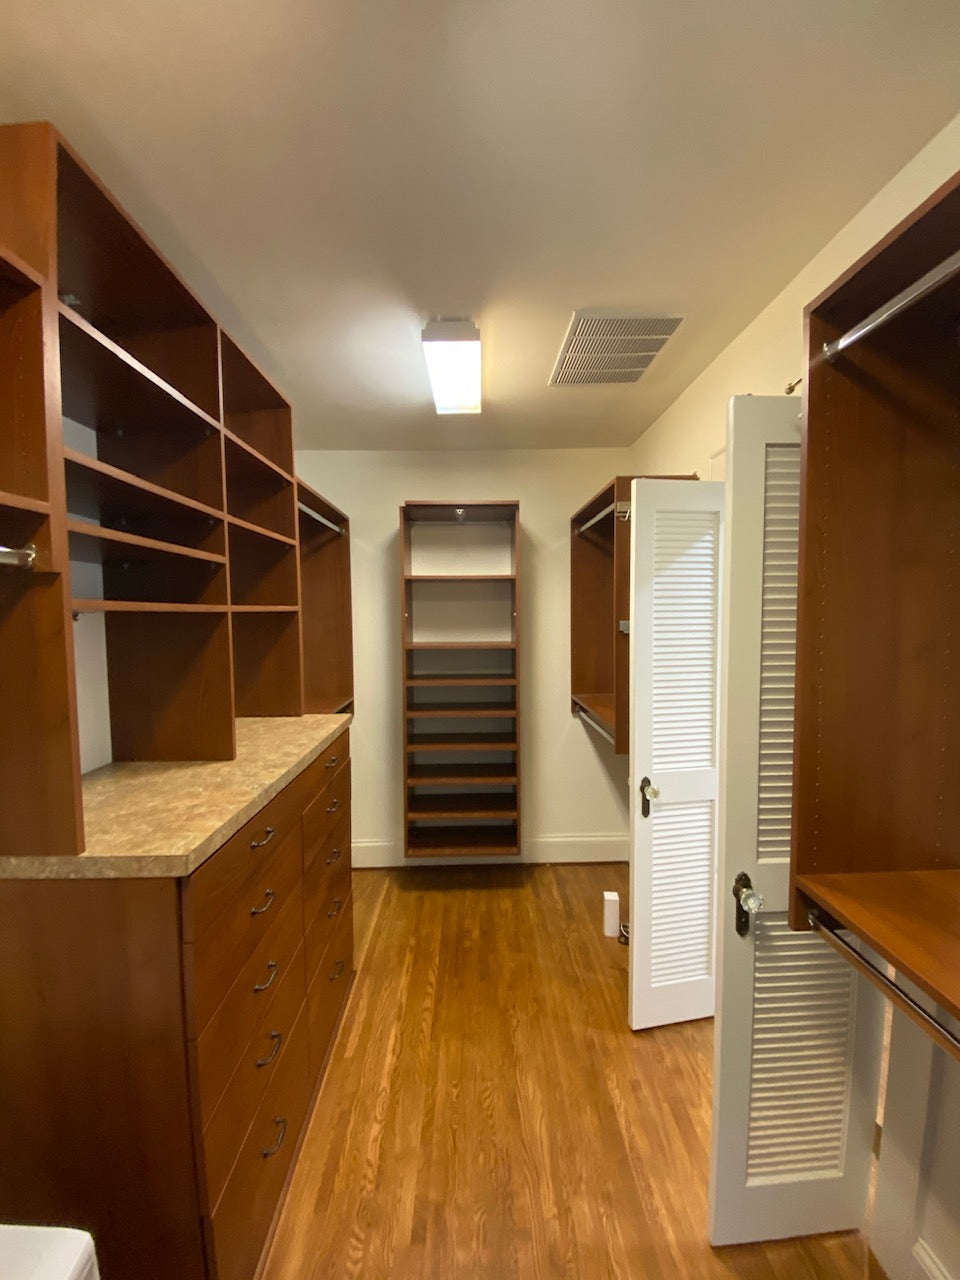 Narrow walk in closet with brown shelves and drawers and white painted walls